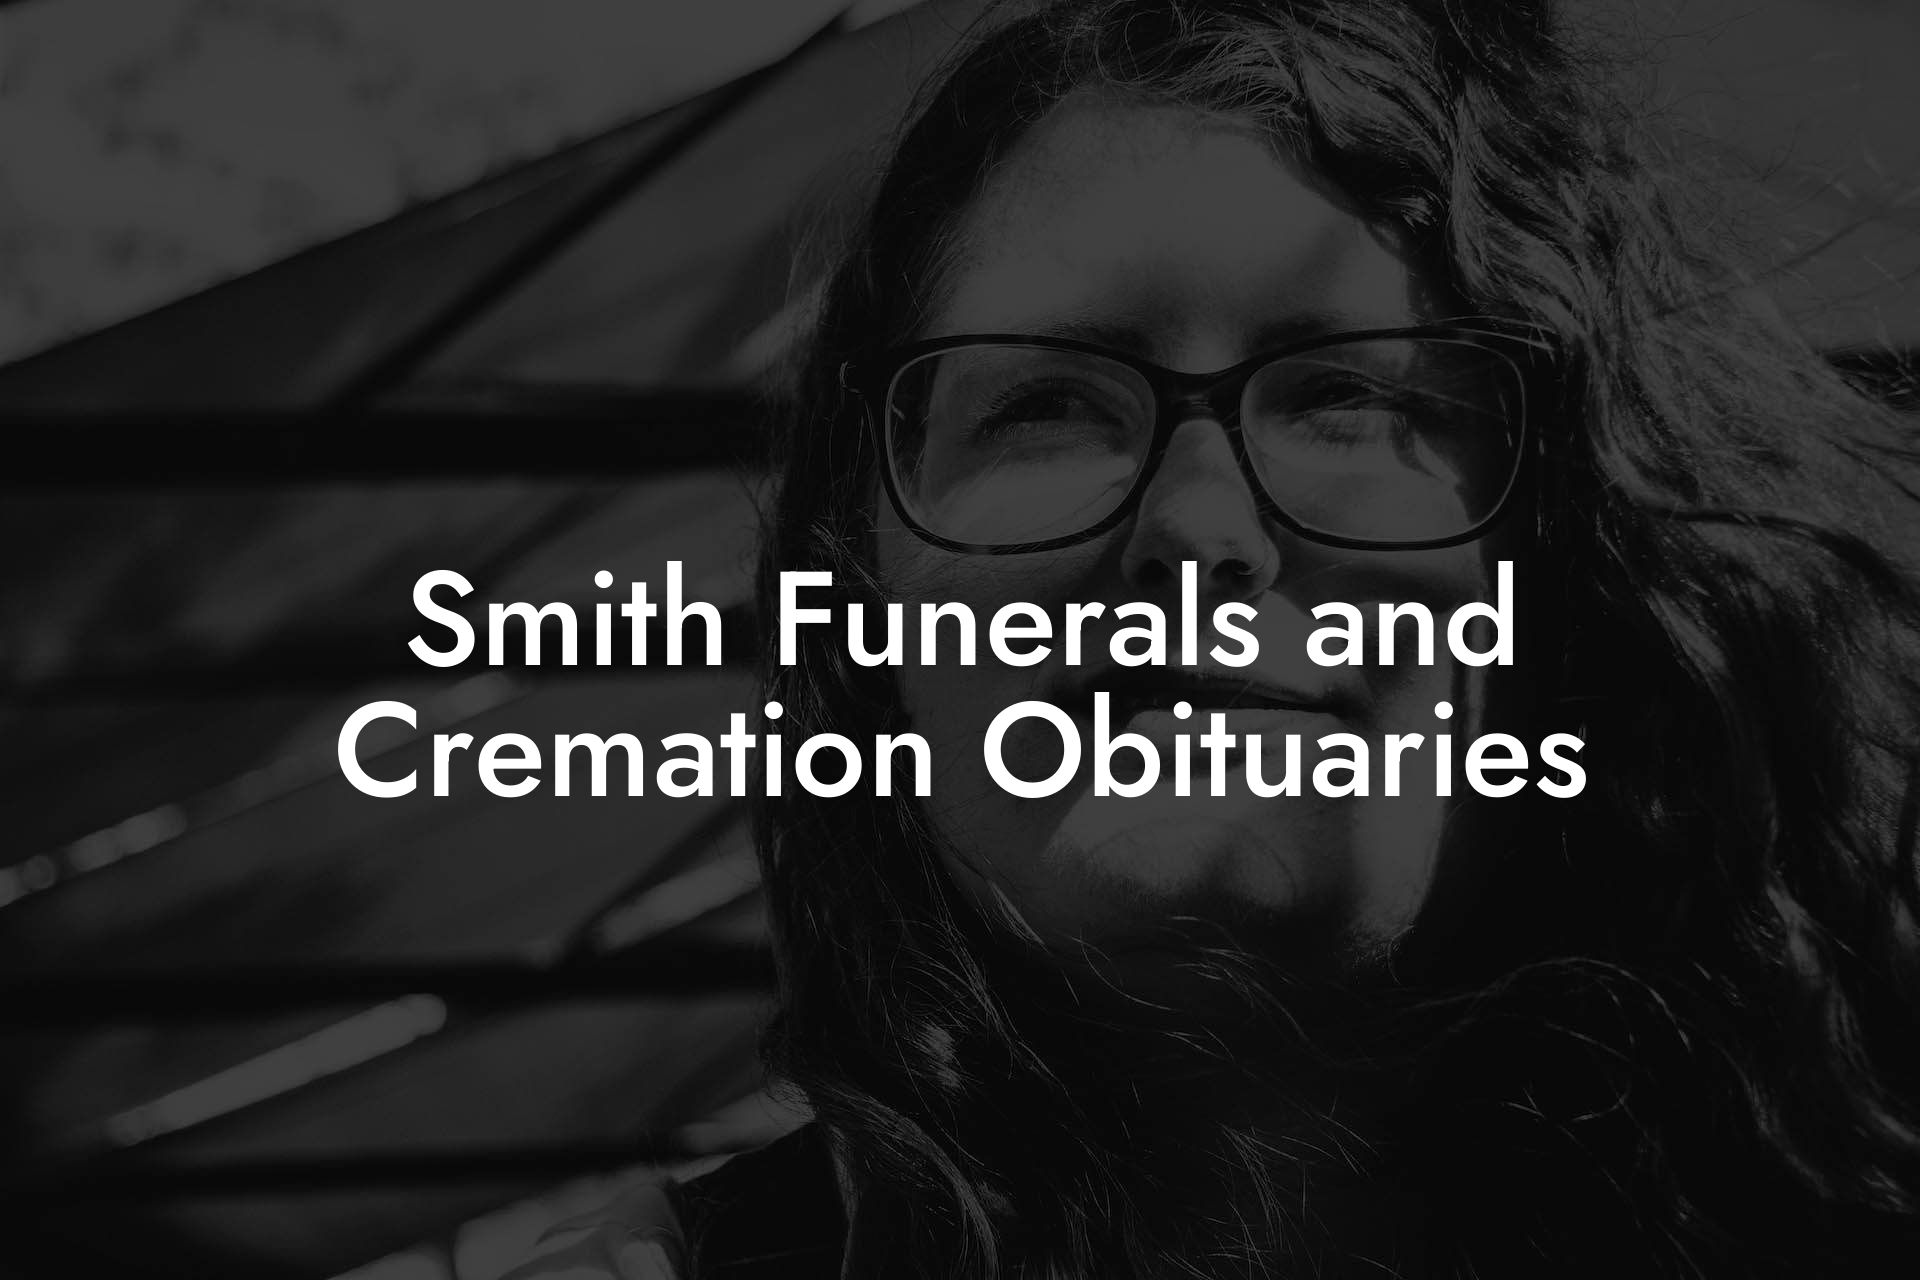 Smith Funerals and Cremation Obituaries